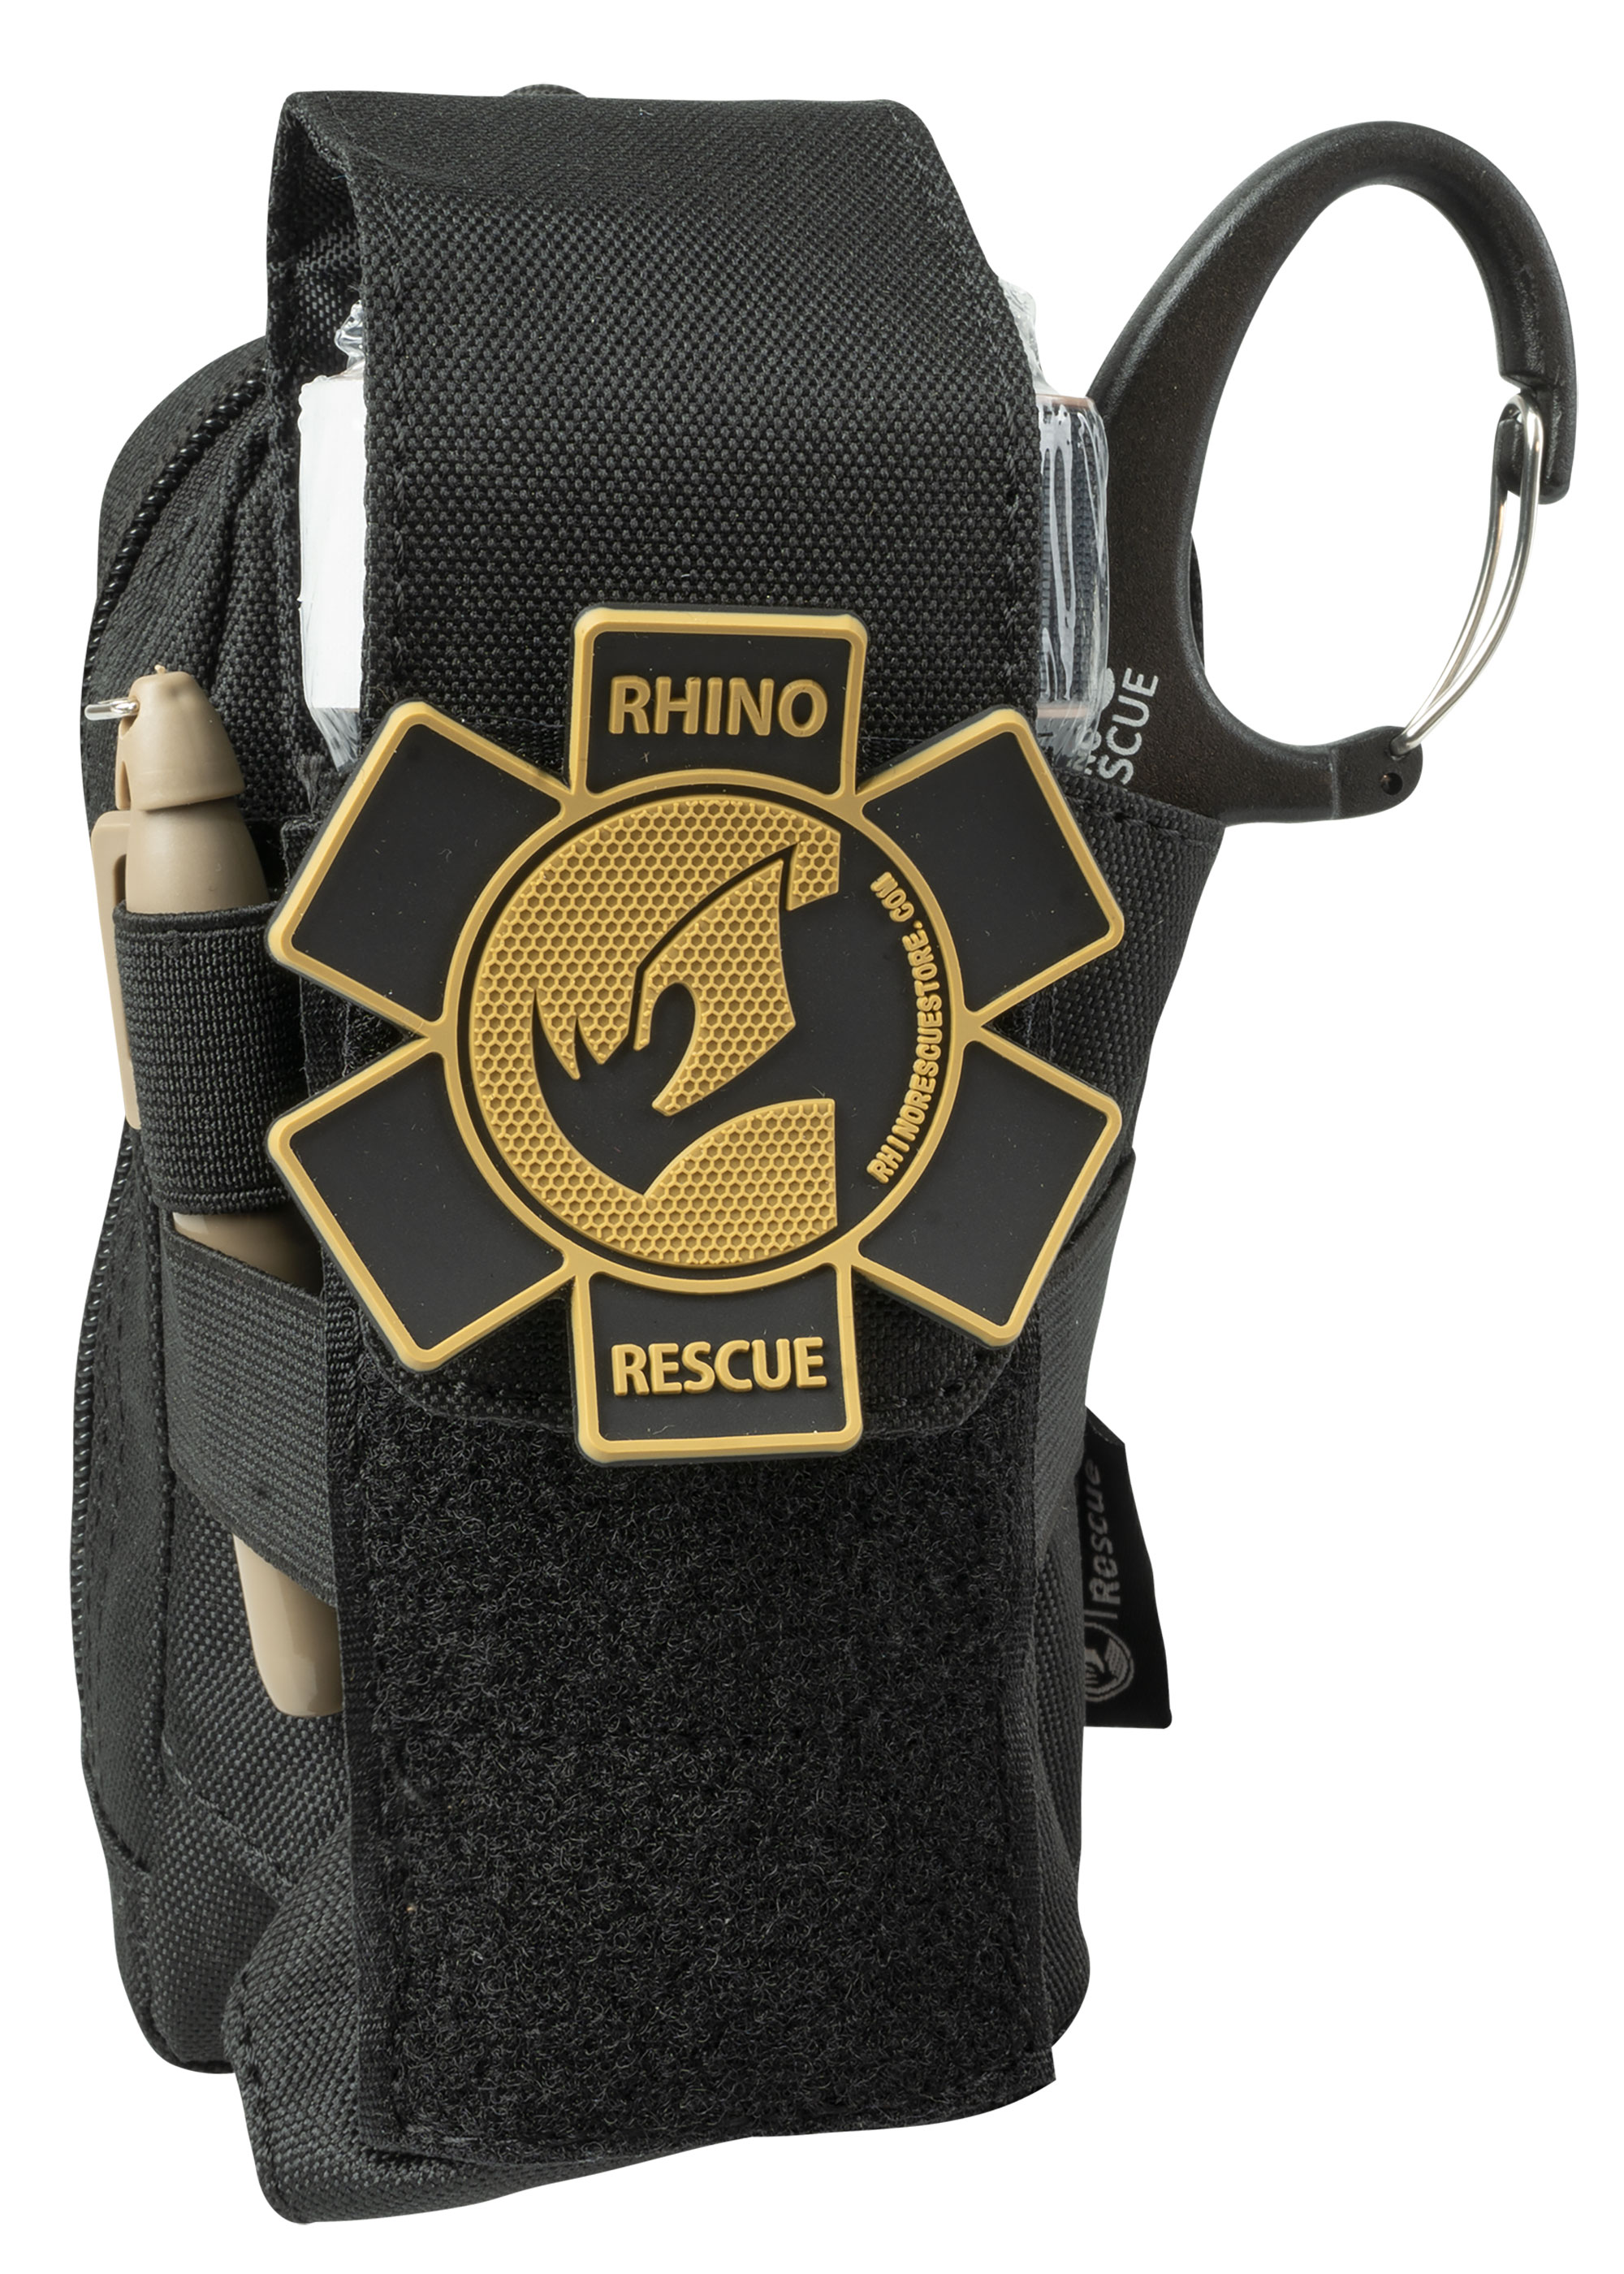 Rhino Rescue IFAK Fanny Pack First Aid Kit